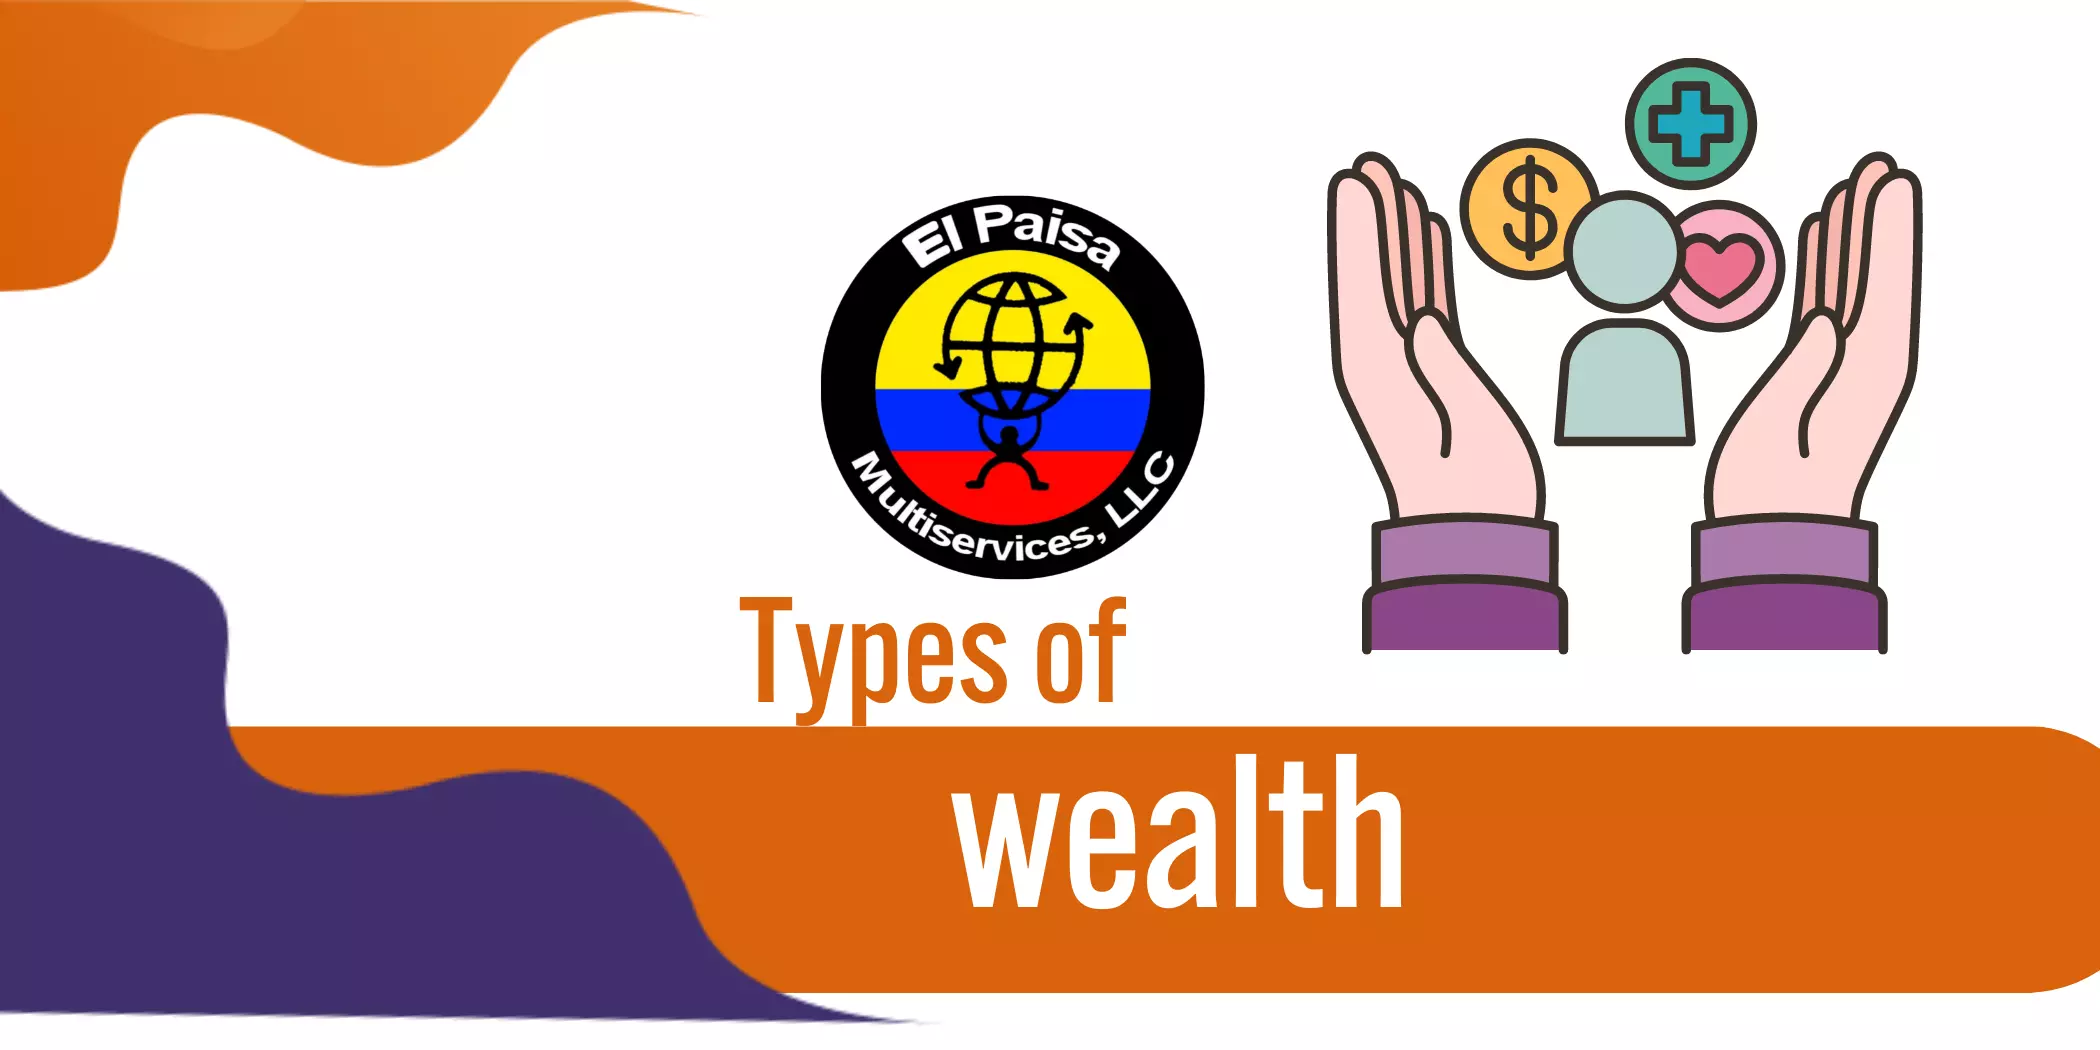 Types of wealth